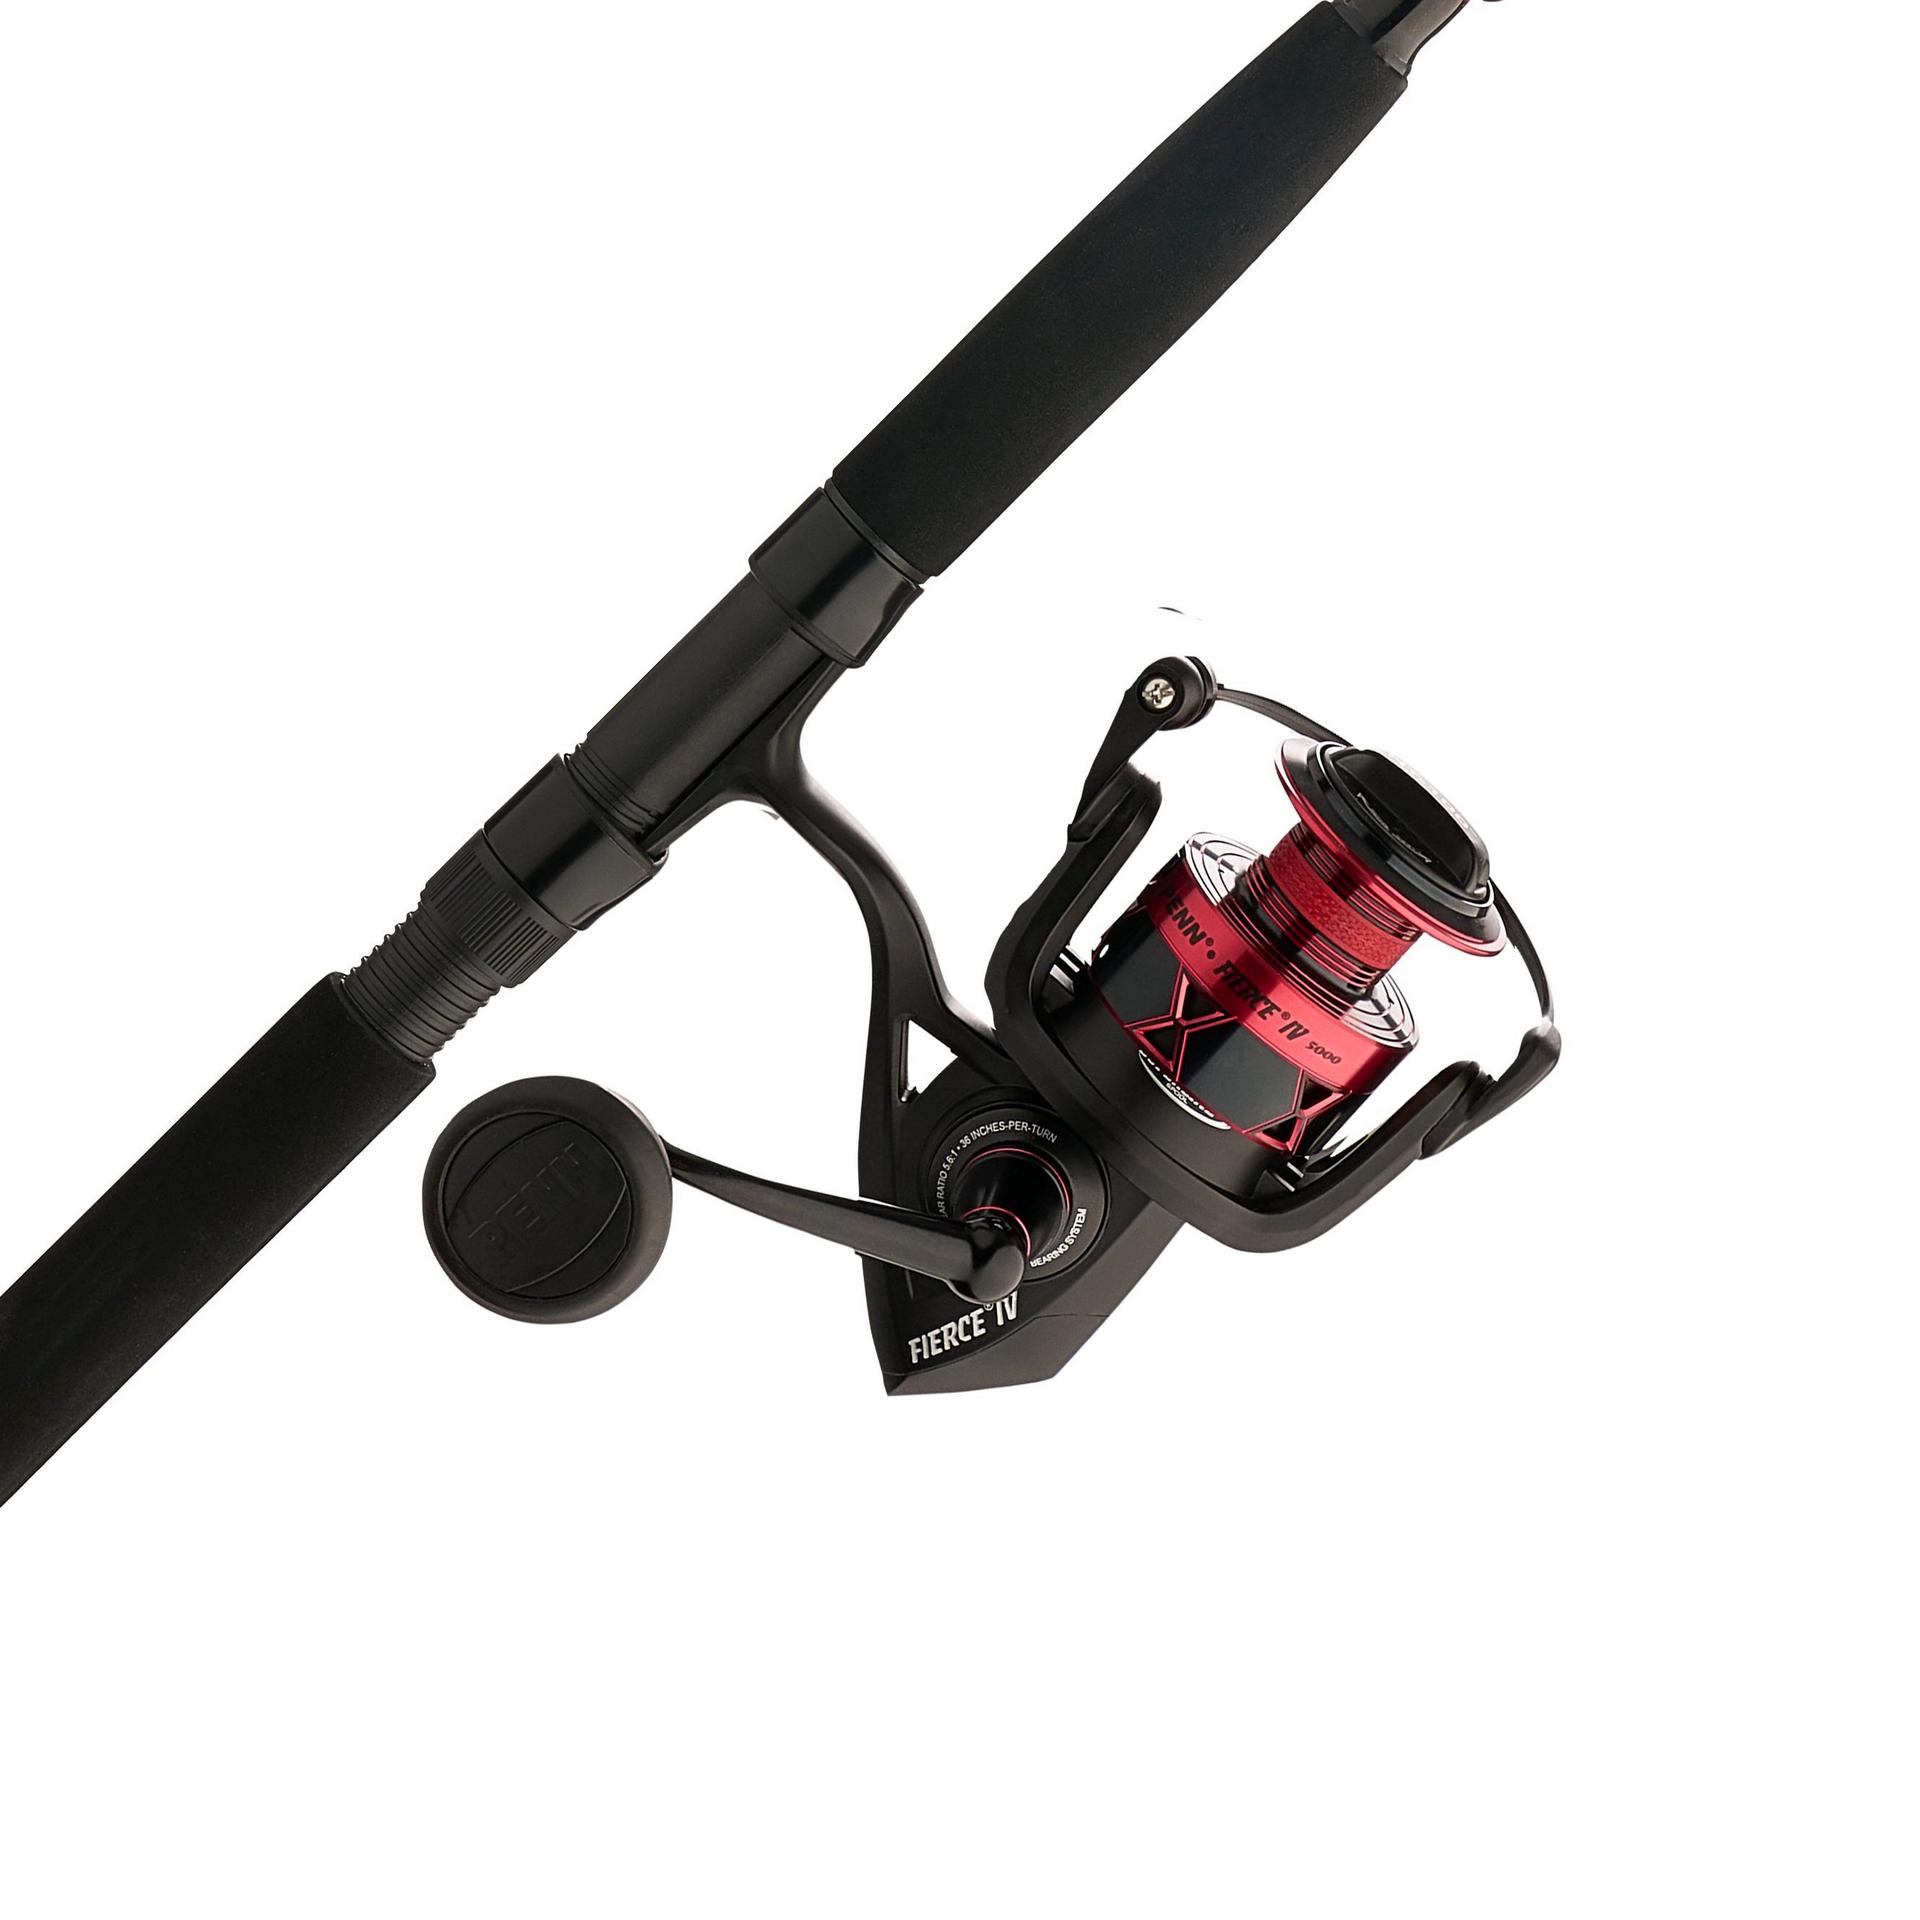 Penn Pursuit Spin Combo 8' Medium Heavy Rod with 5000 Reel